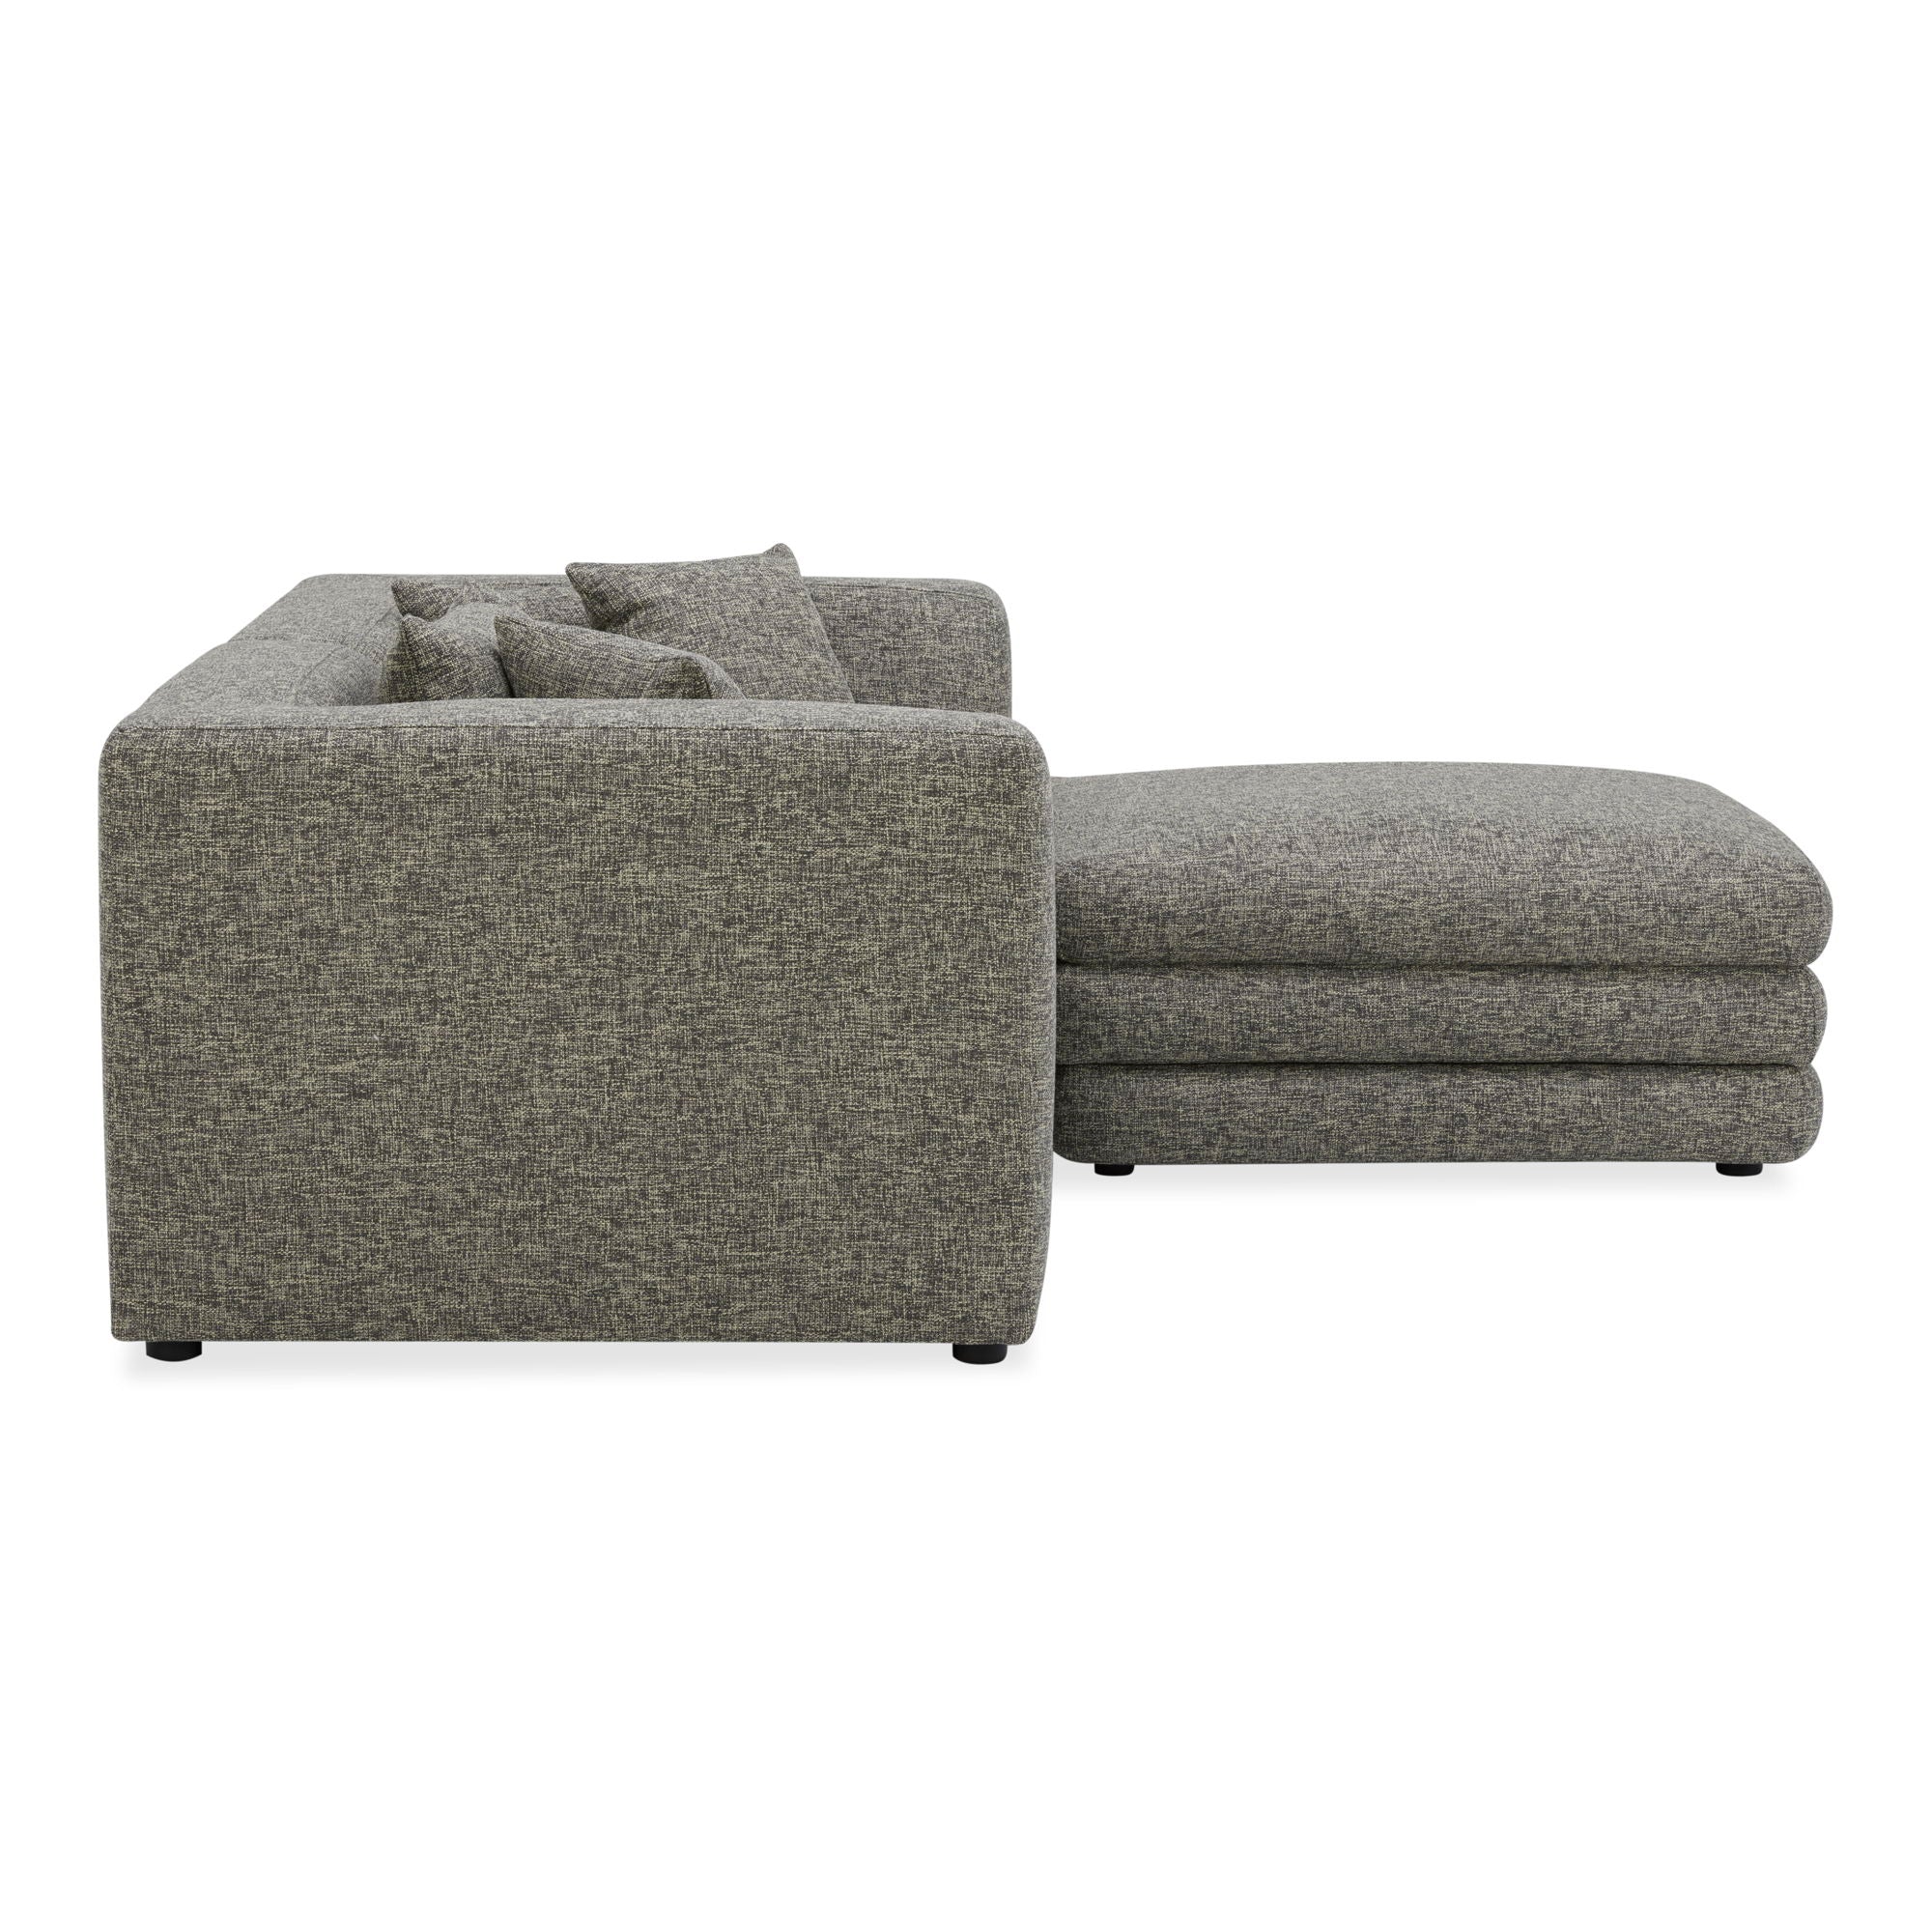 Lowtide - Nook Modular Sectional - Surie Shadow-Stationary Sectionals-American Furniture Outlet